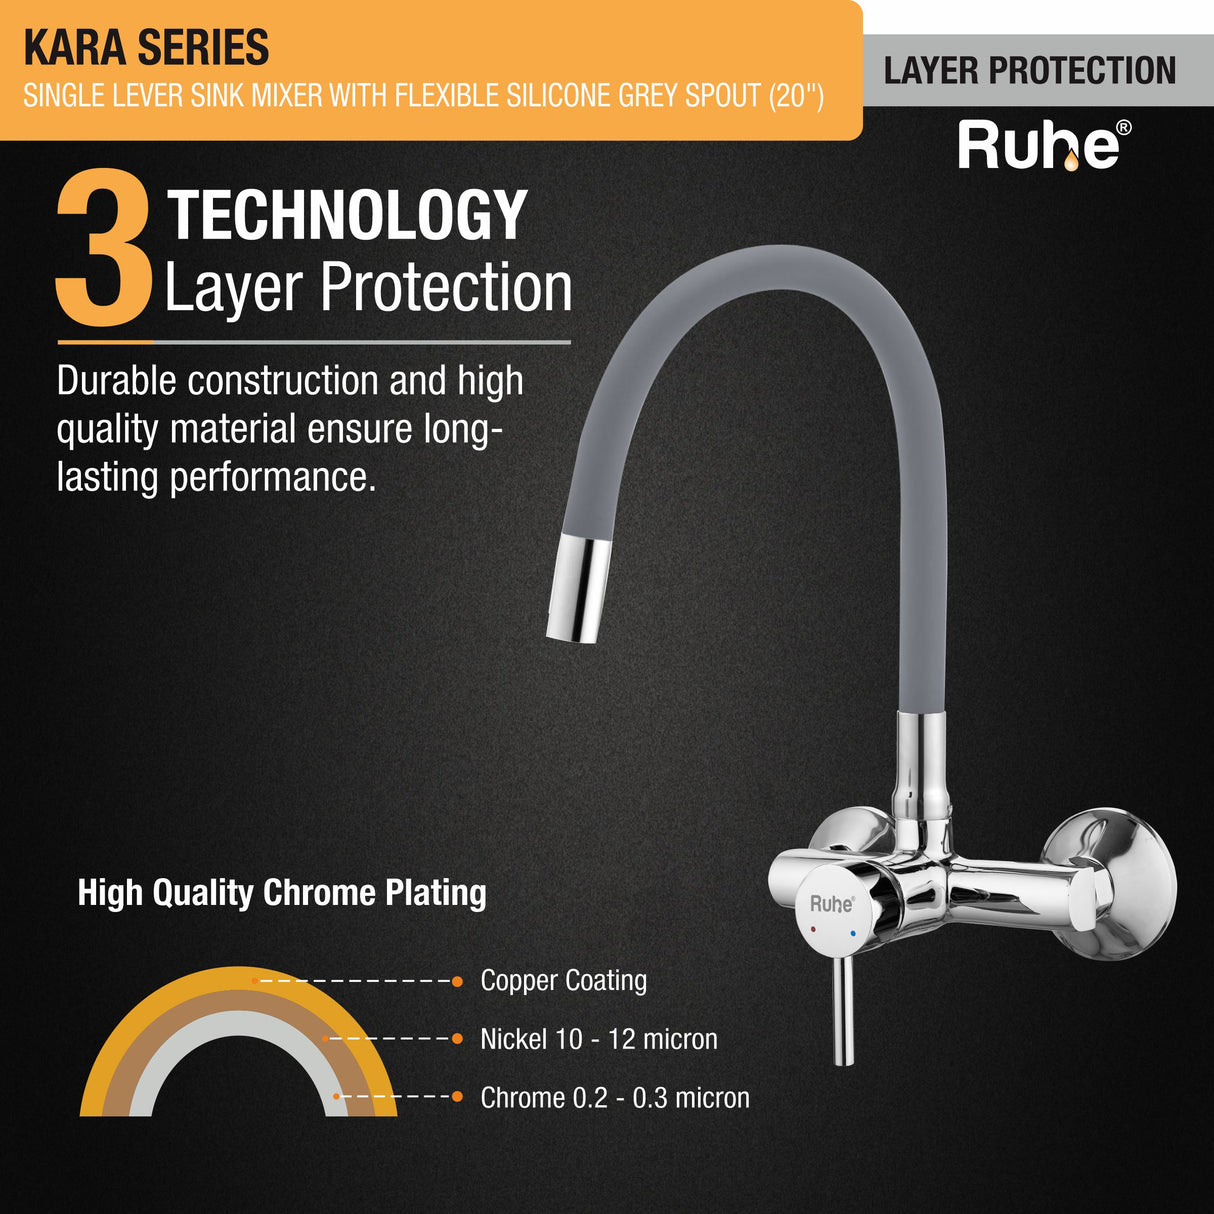 Kara Single Lever Wall-mount Sink Mixer Brass Faucet with Grey Silicone Spout - by Ruhe®